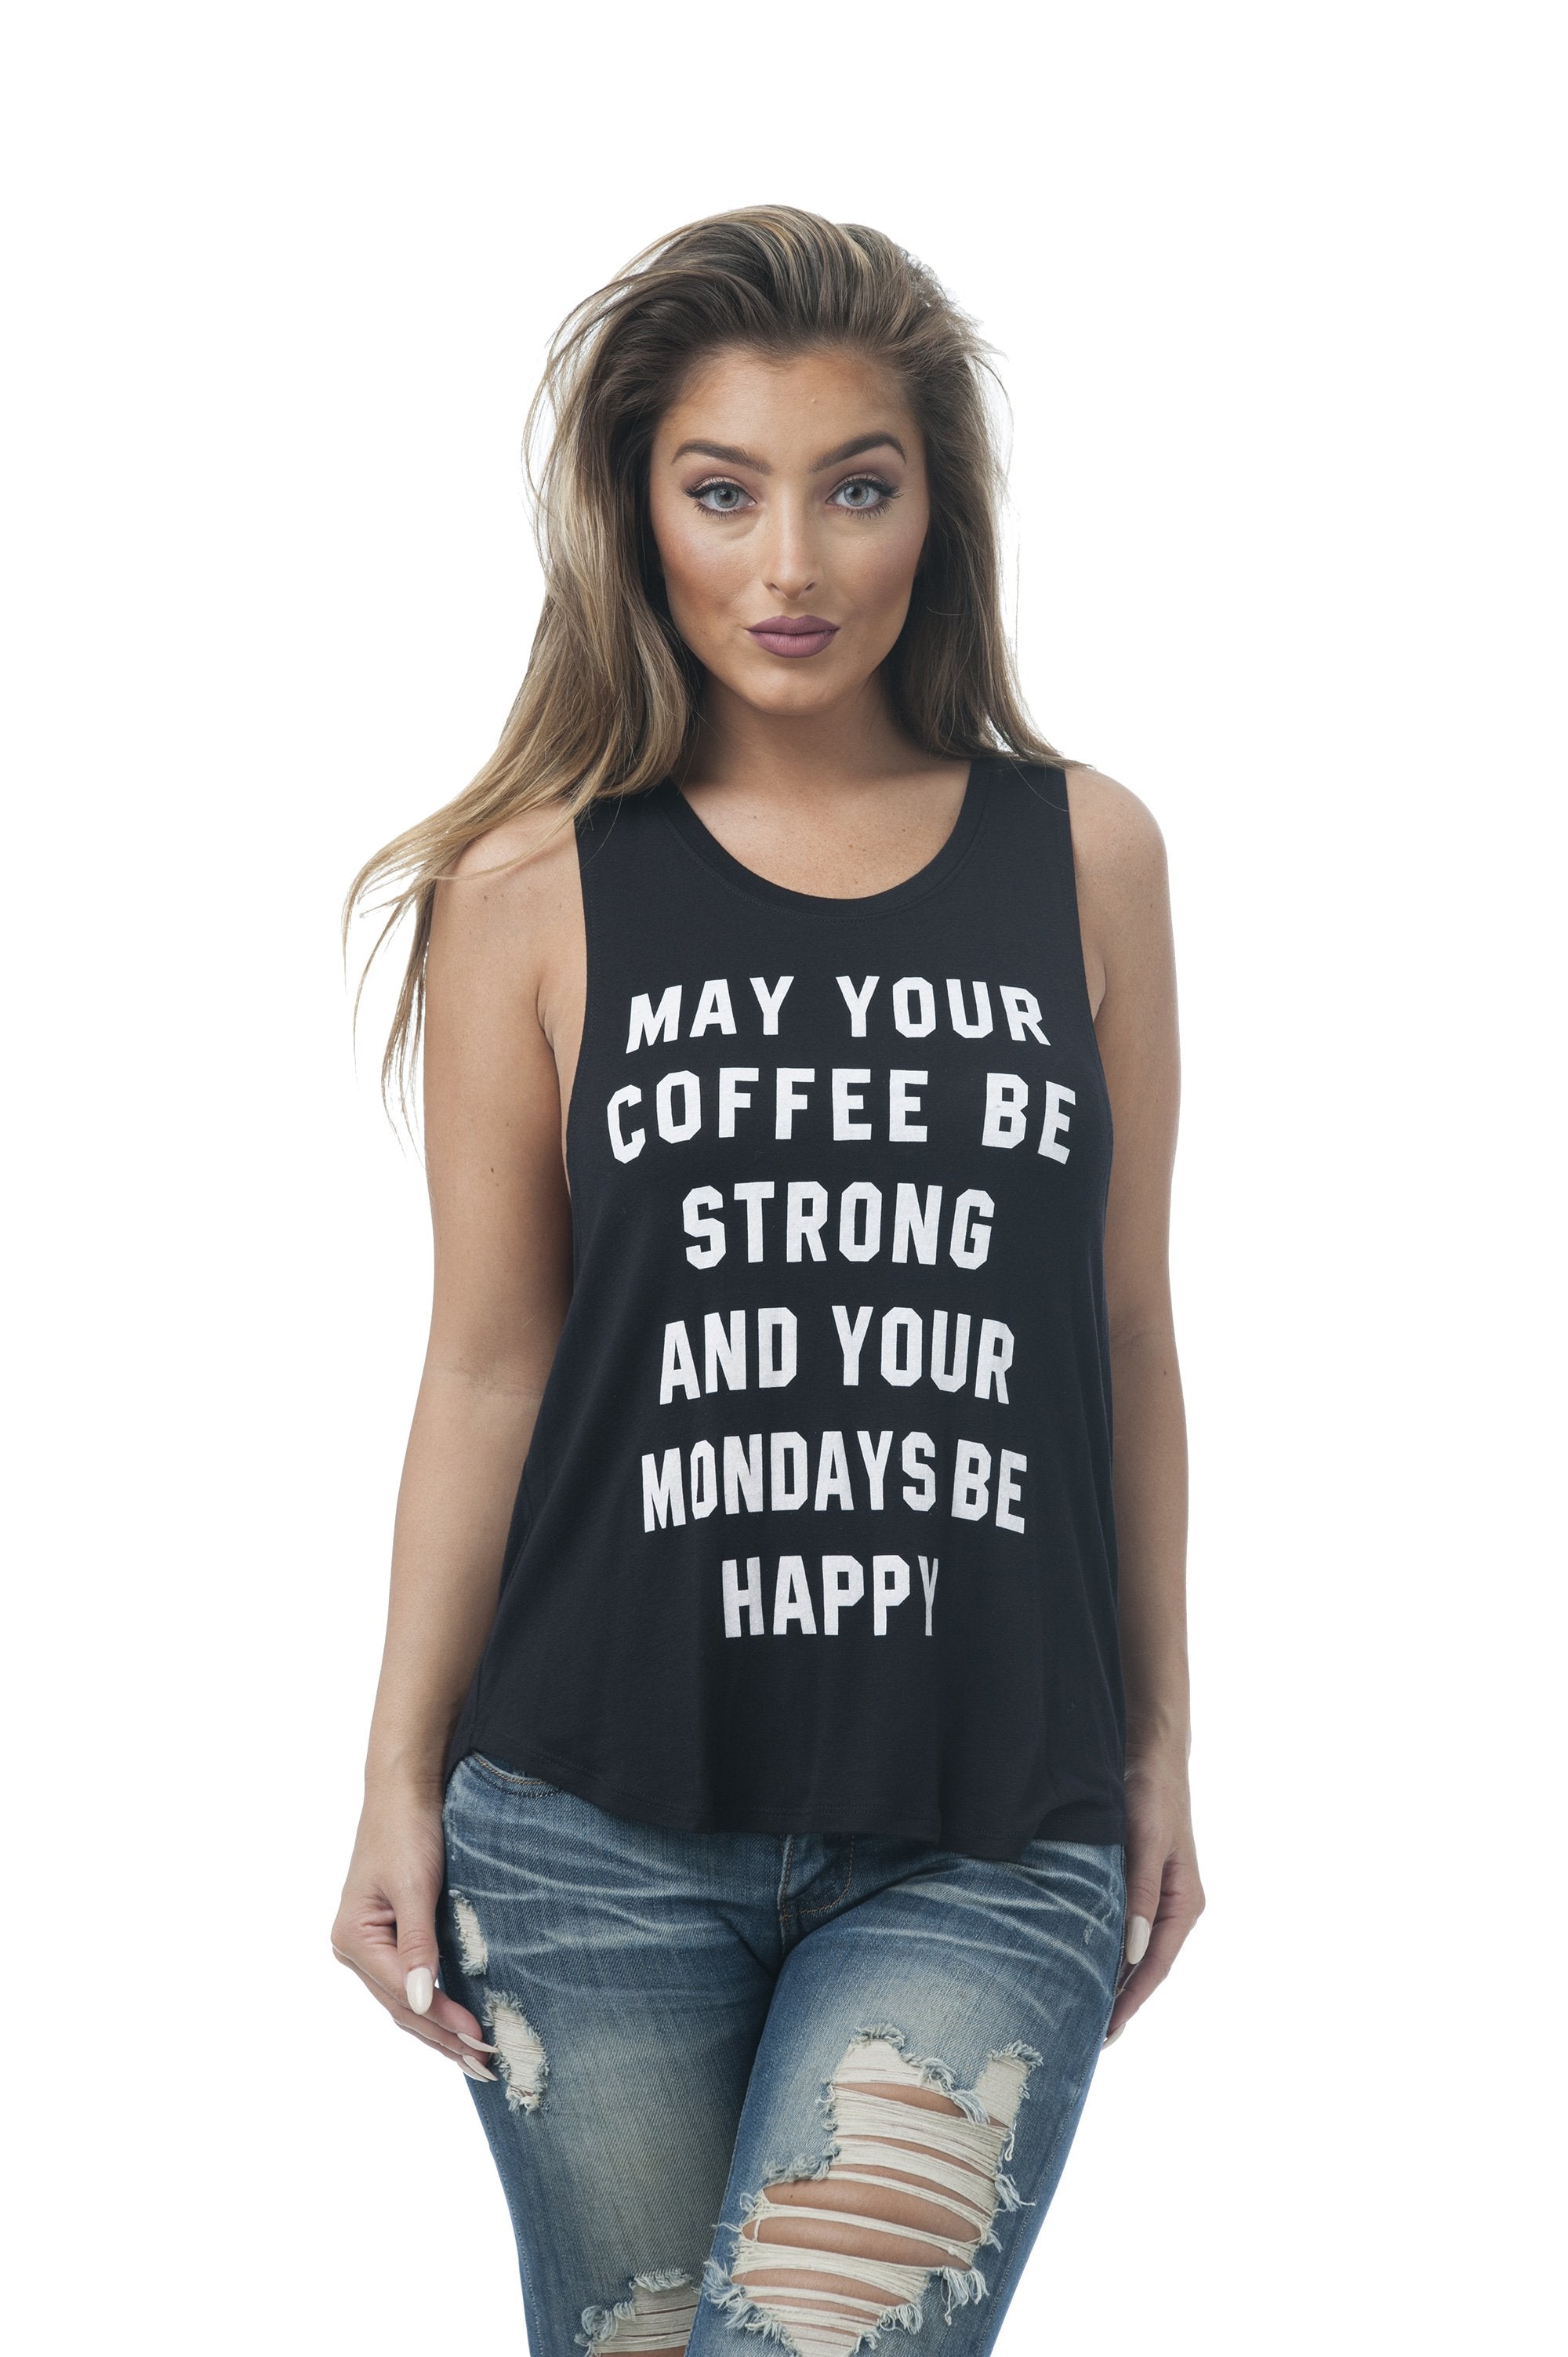 Khanomak Women's Sleeveless Shirt Tank Top Graphic Tee's May Your Coffee Be Strong